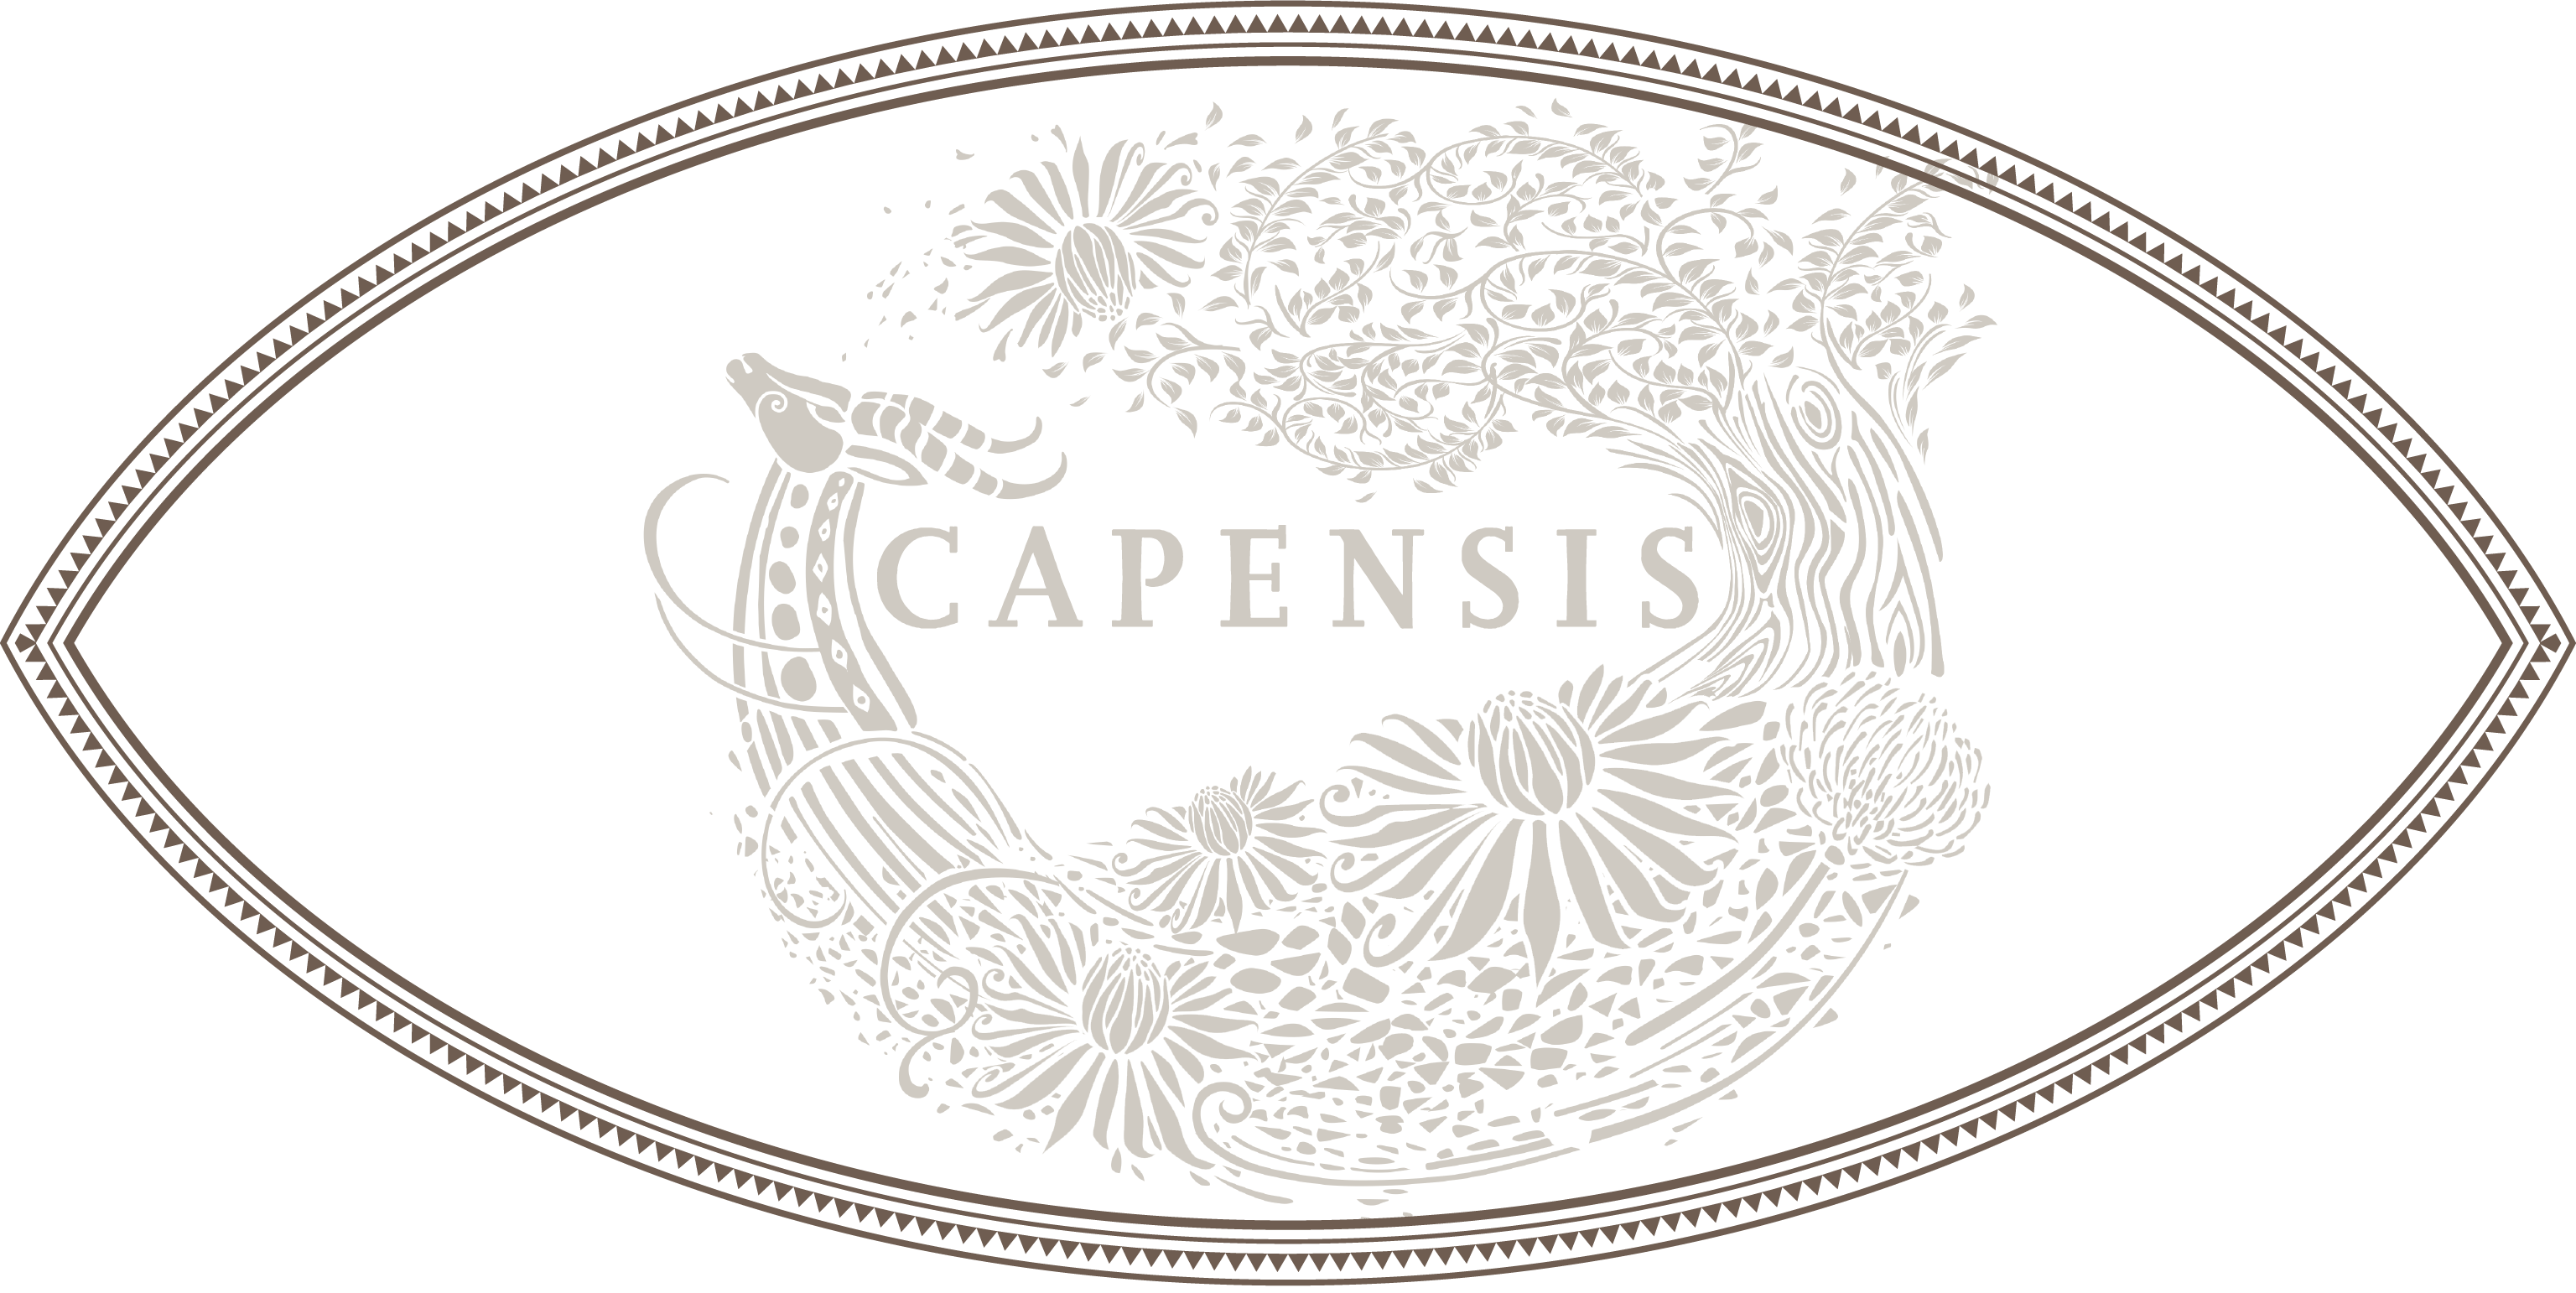 Capensis label with Zulu Shield ighlighted